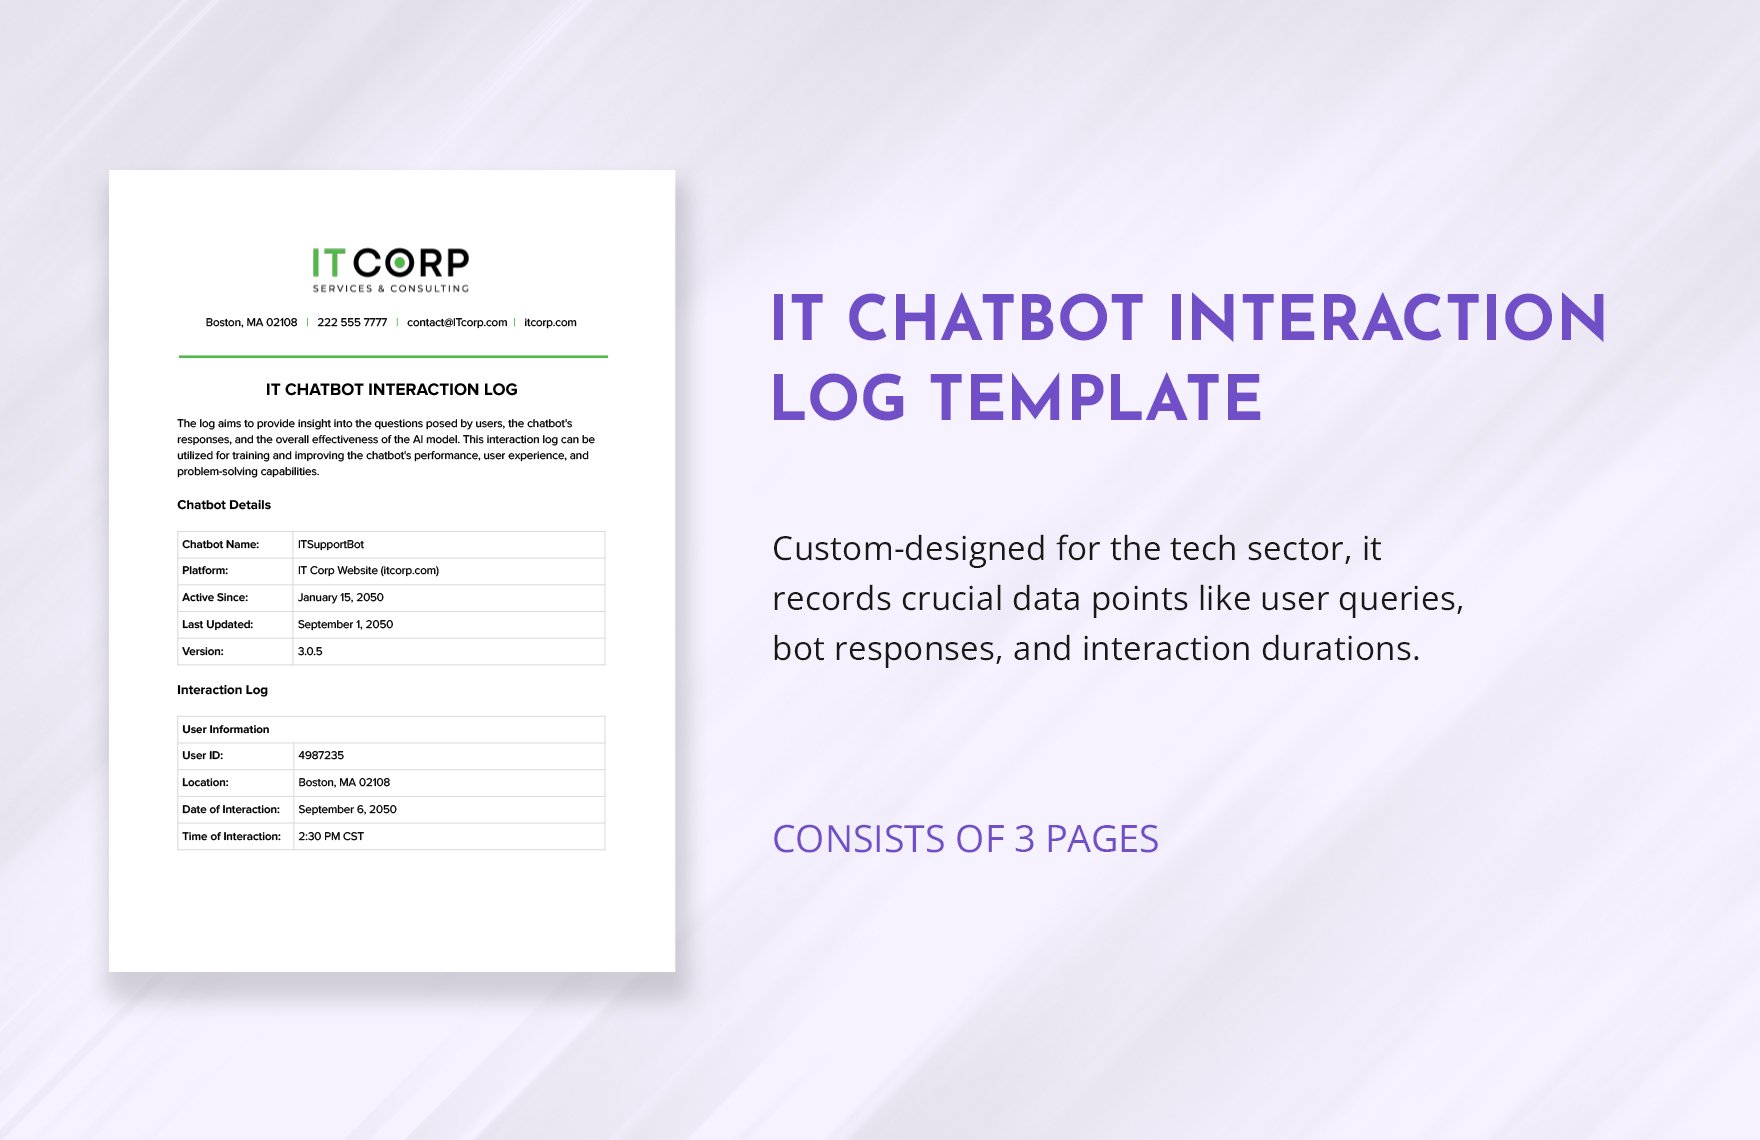 IT Chatbot Interaction Log Template